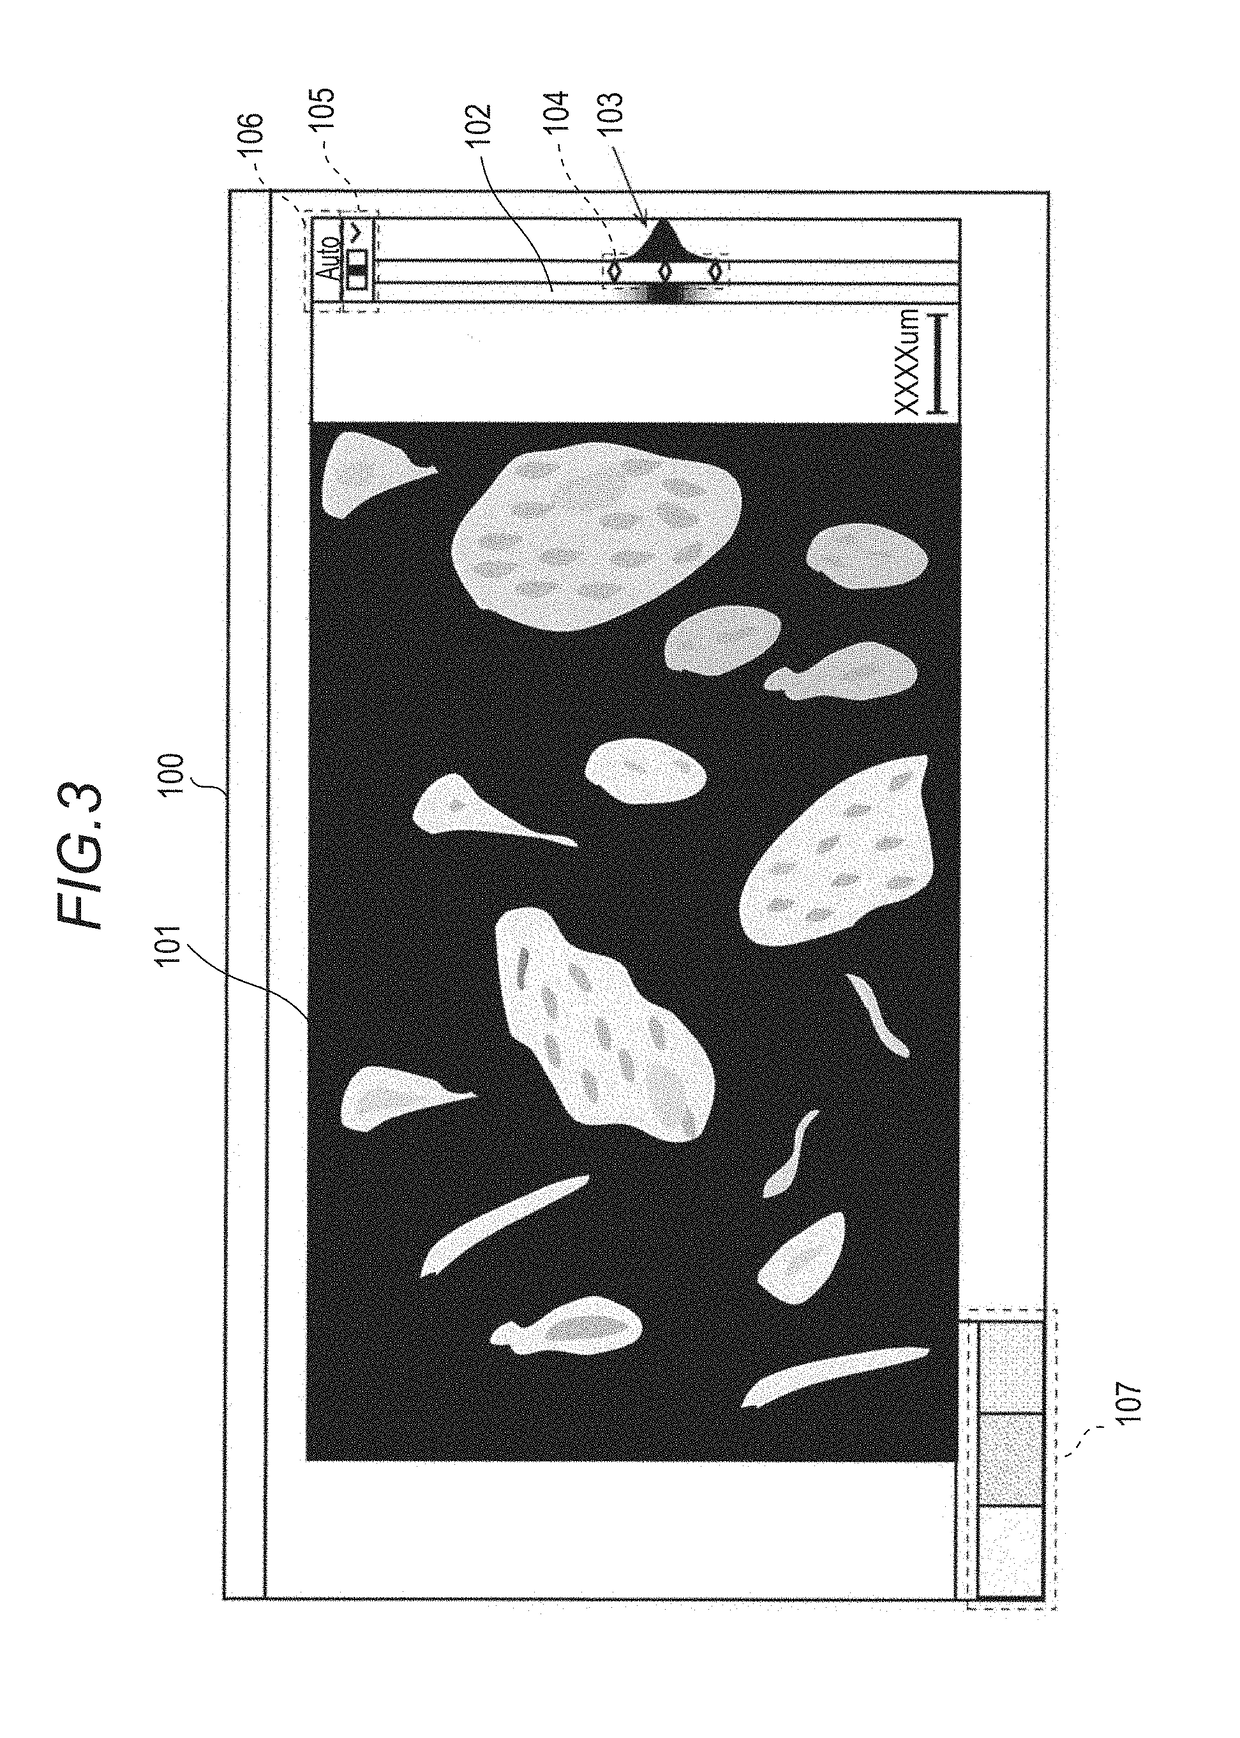 Cell observation apparatus